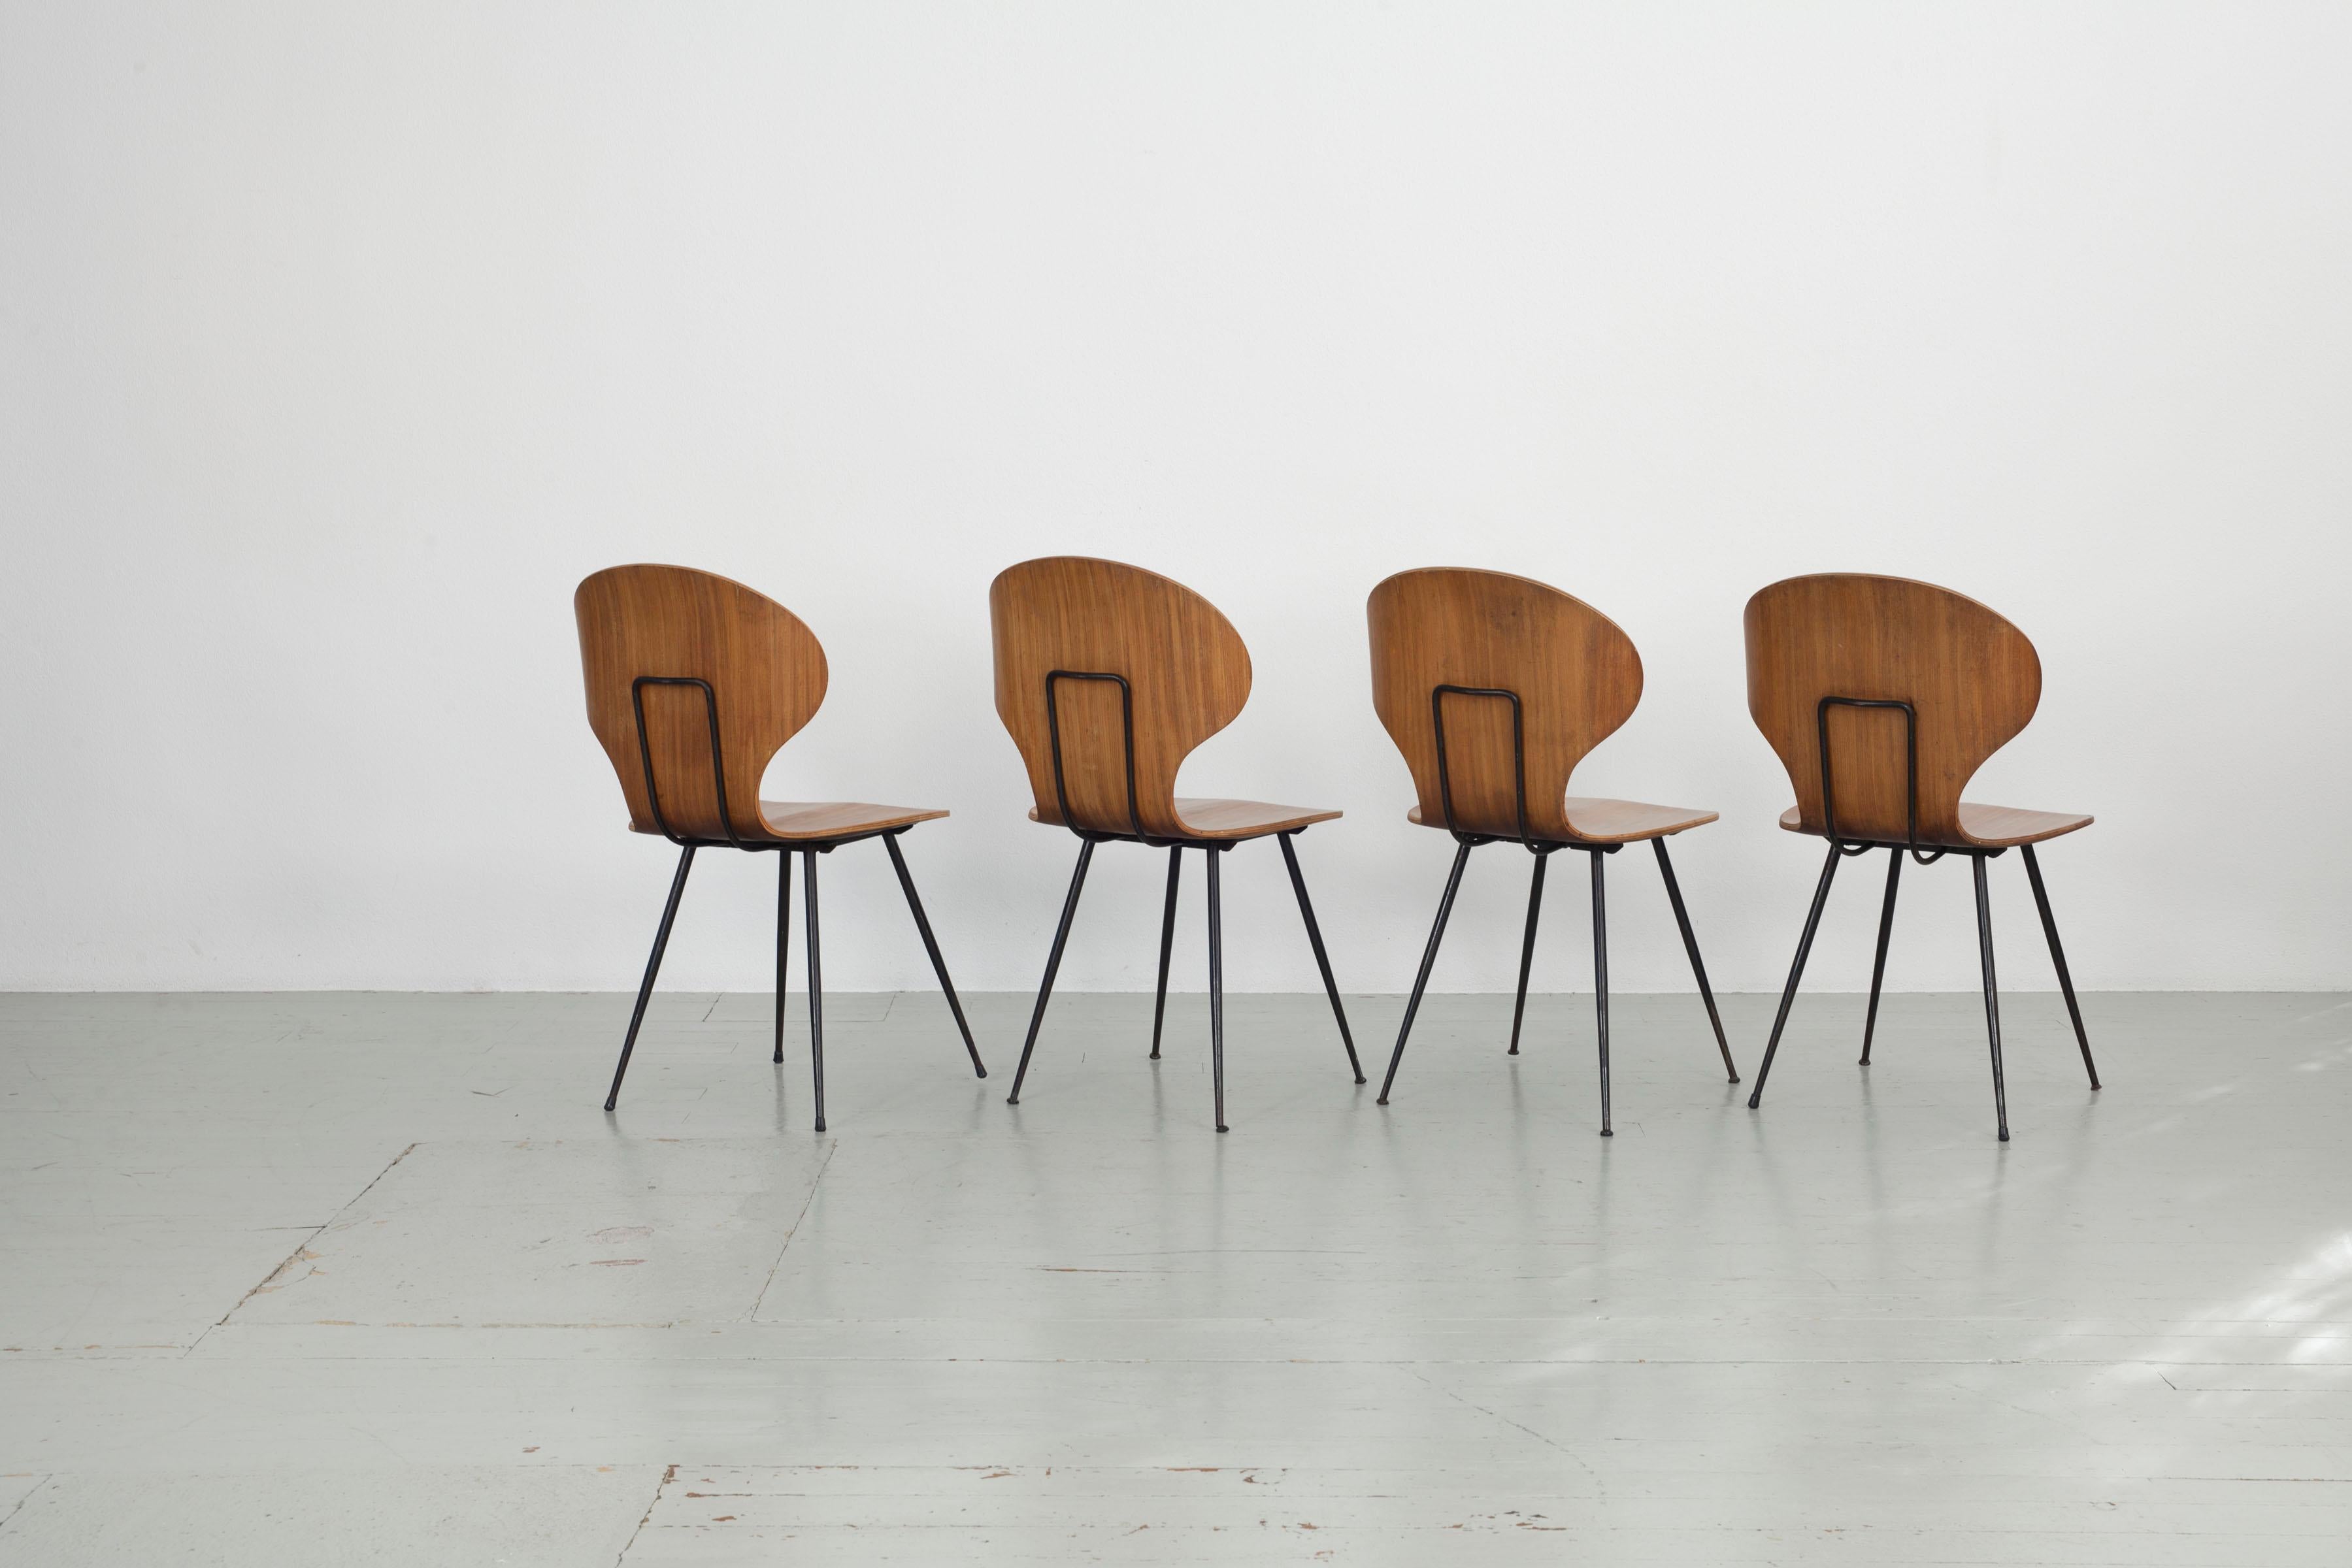 Italian Set of 4 Bentwood chairs by Carlo Ratti, Industria Legni Curvati, Italy  1950s. For Sale